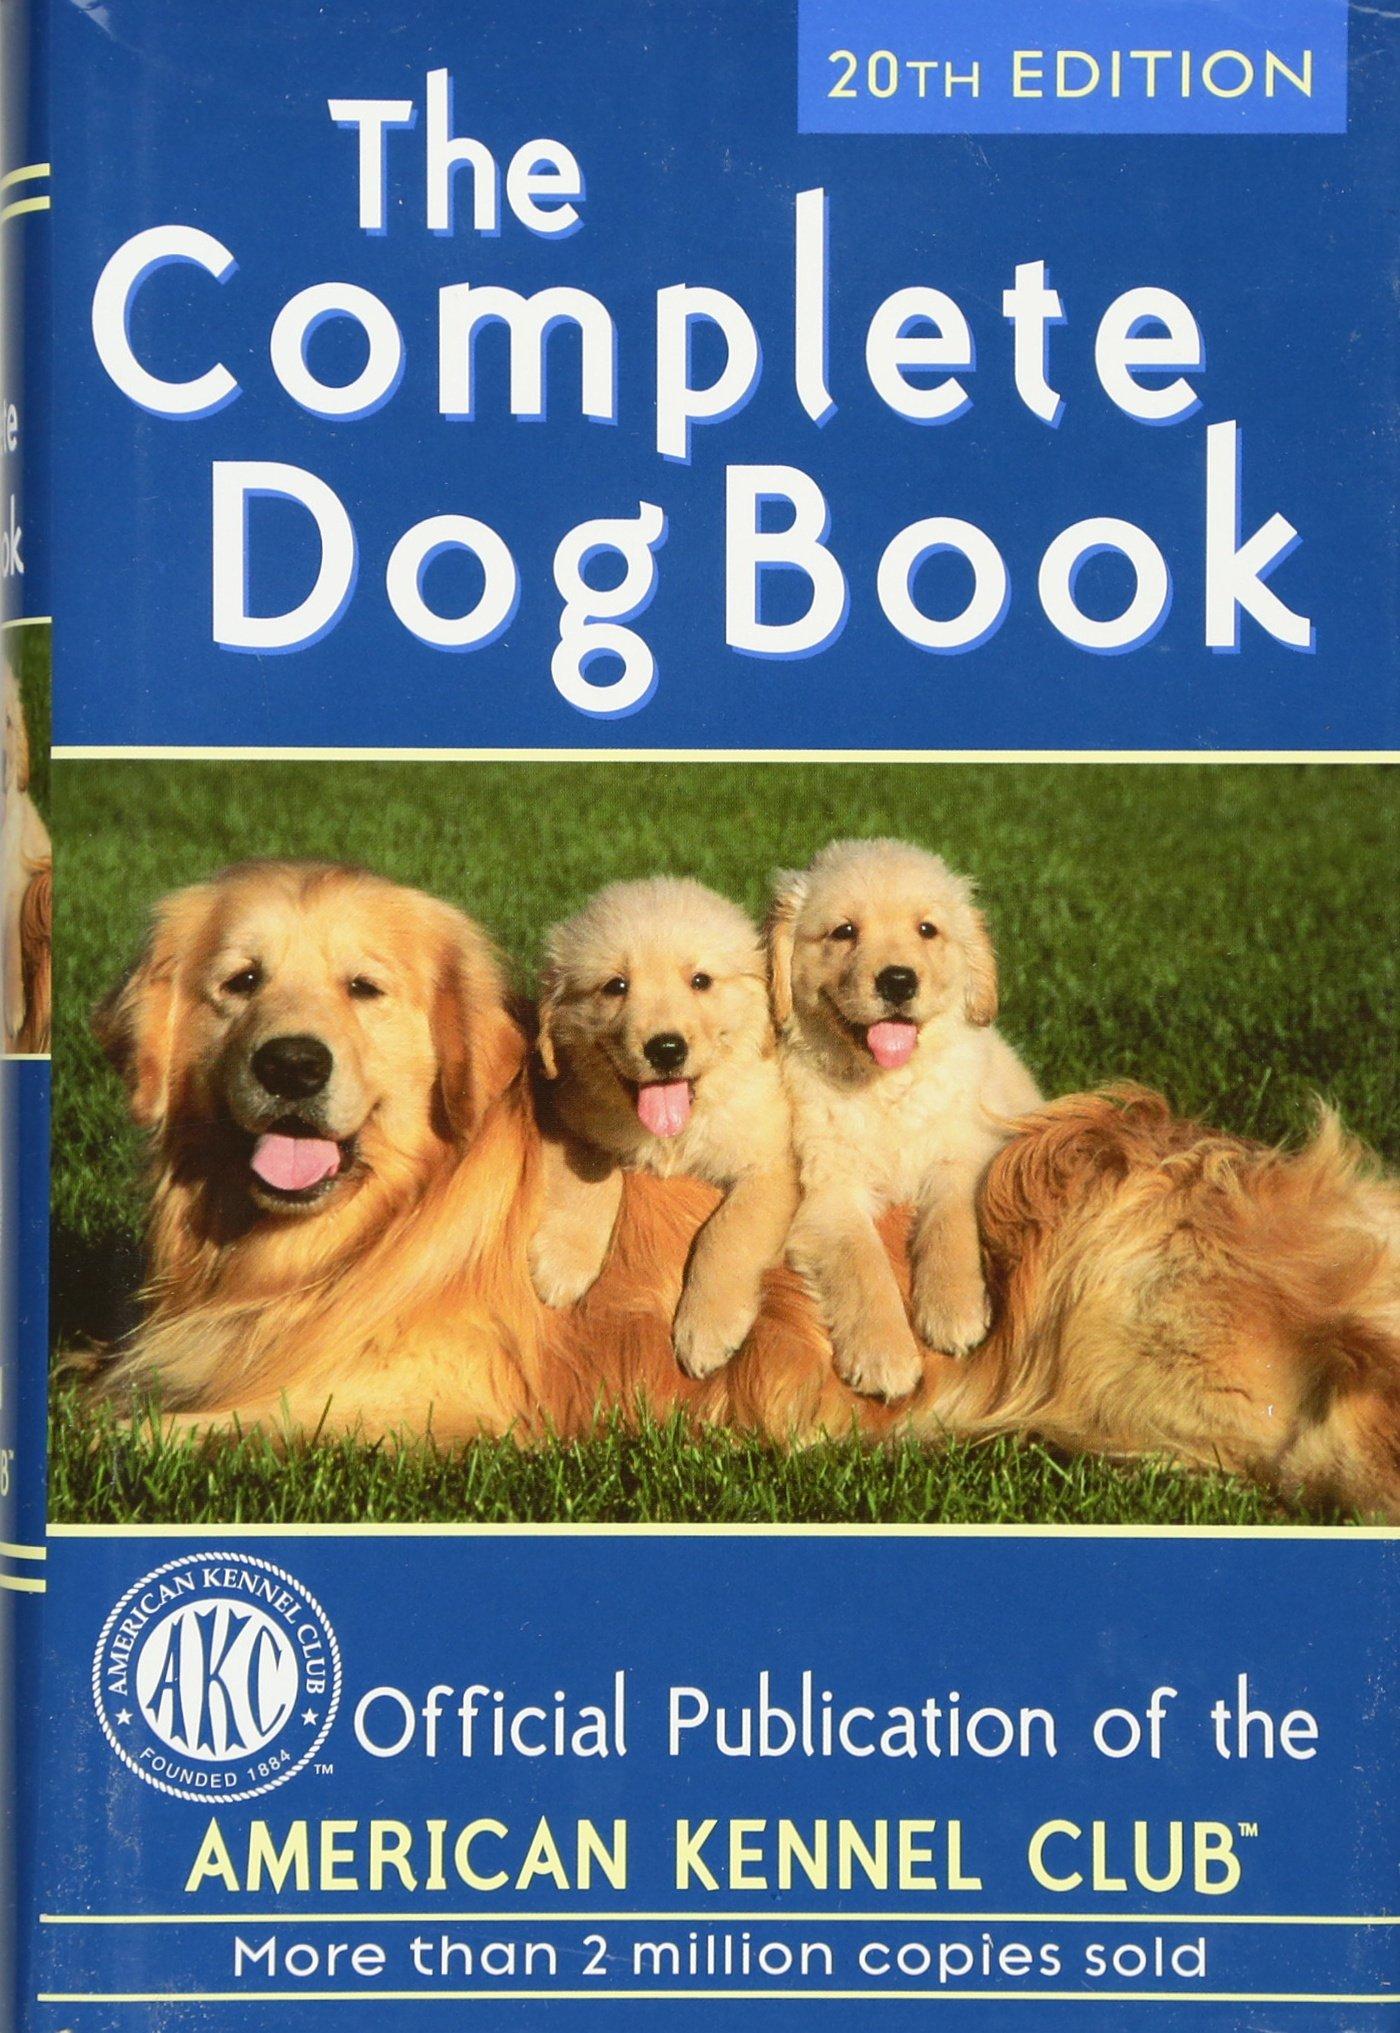 The Complete Dog Book 20th Edition AKC